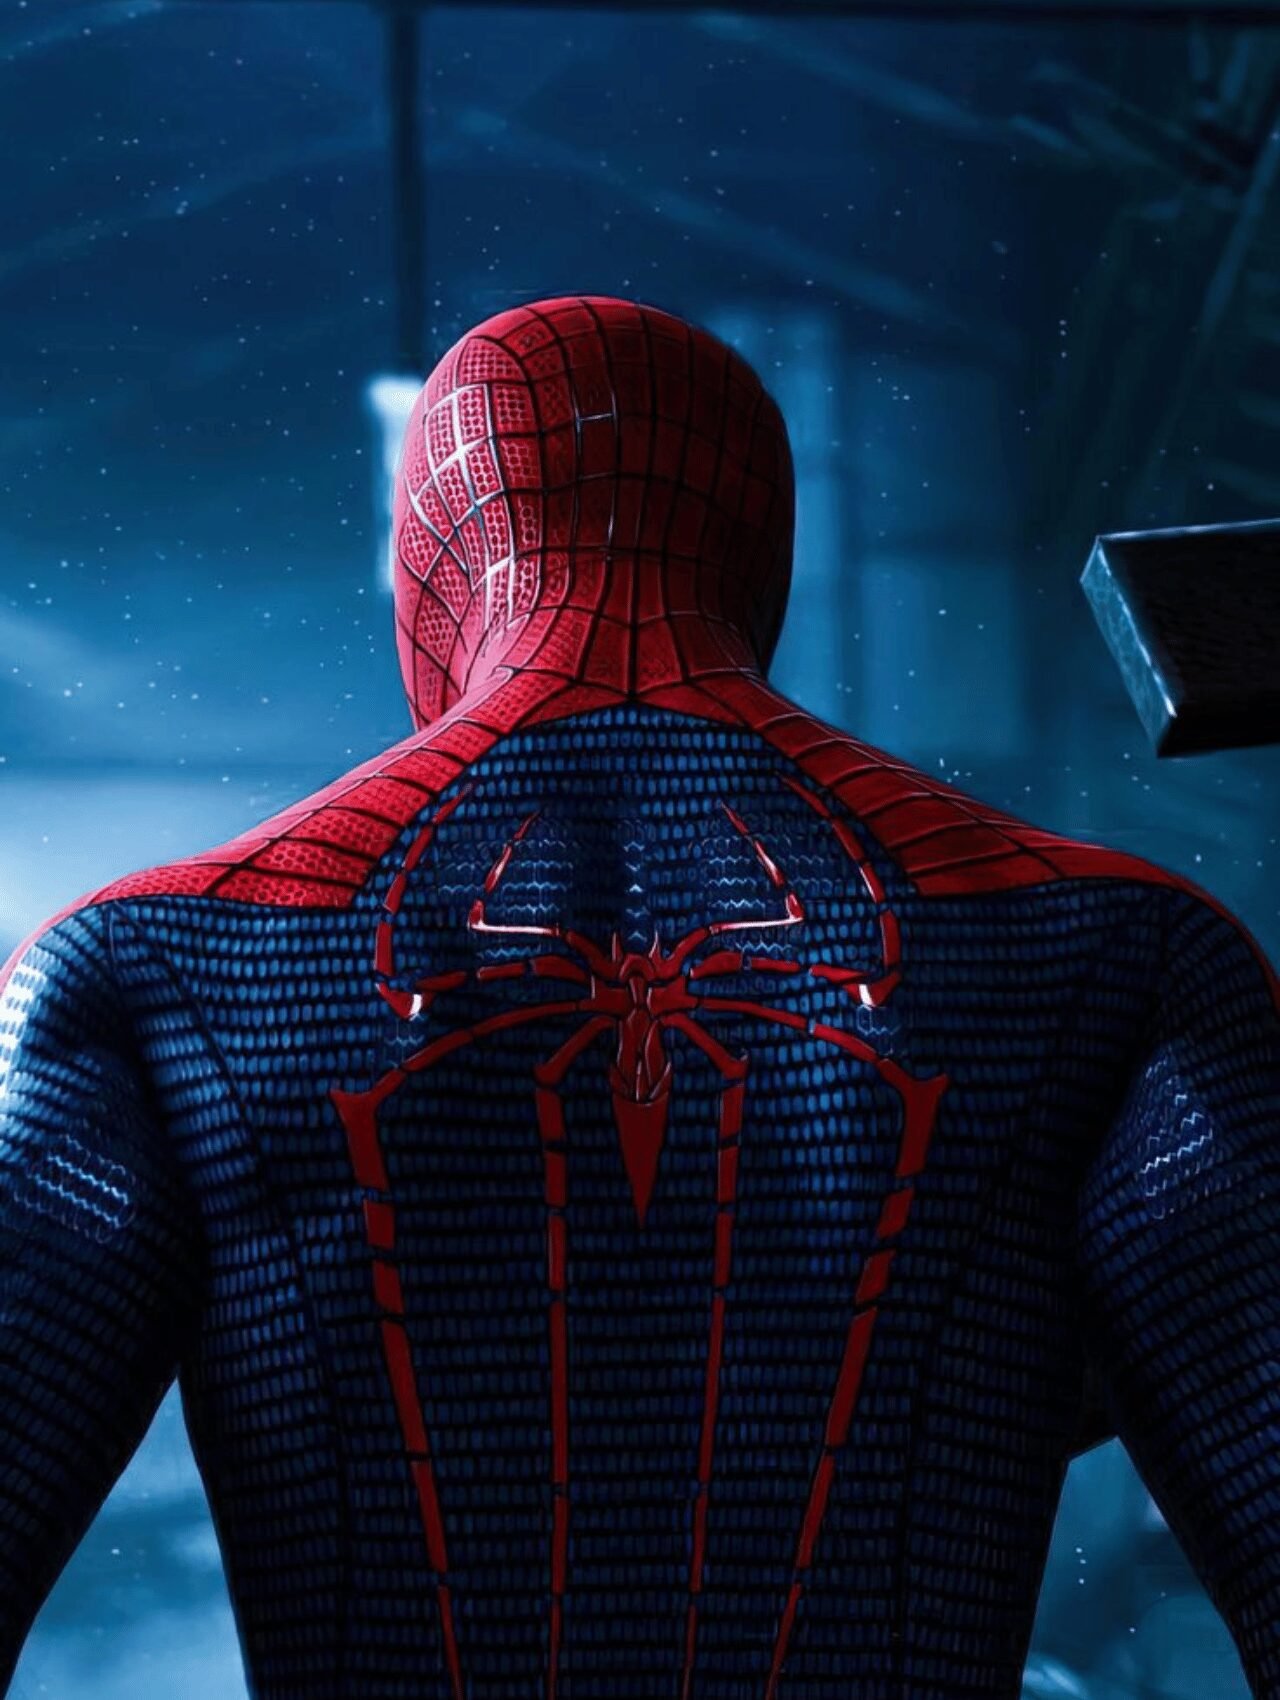 Spider-Man 4's villain might have leaked and fans are going to love it